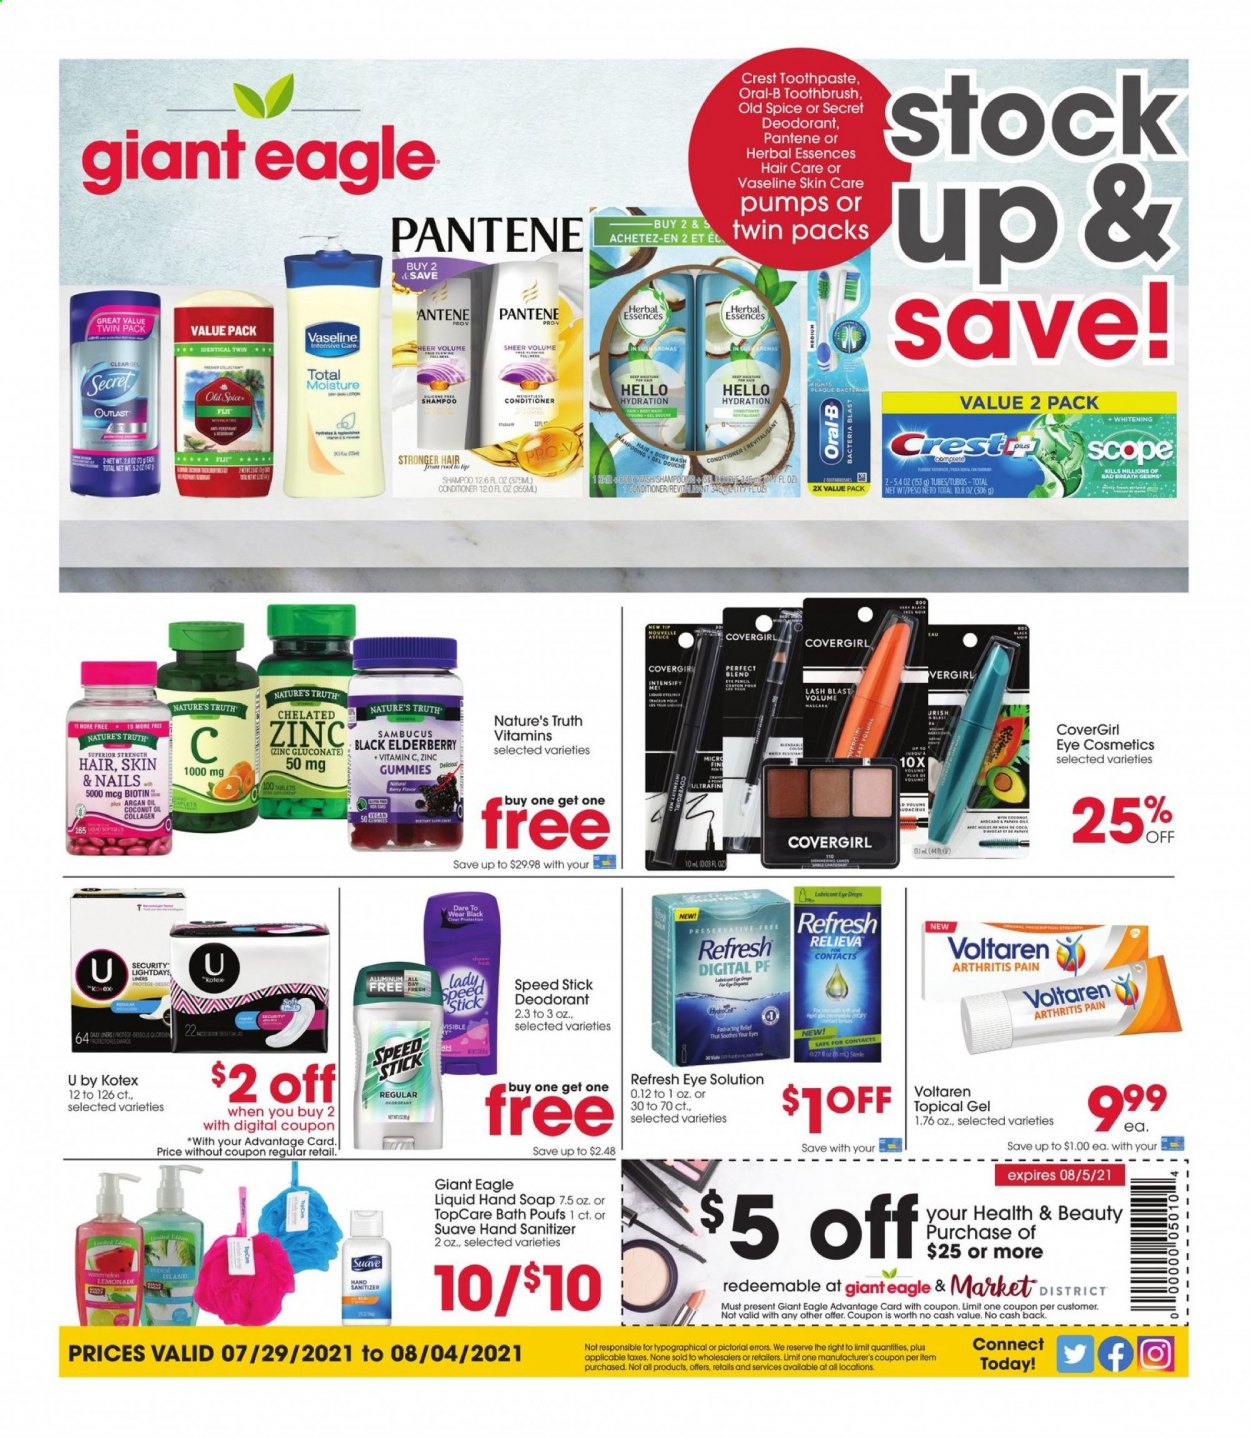 thumbnail - Giant Eagle Flyer - 07/29/2021 - 08/04/2021 - Sales products - spice, L'Or, shampoo, Suave, hand soap, Old Spice, Vaseline, soap, toothbrush, Oral-B, toothpaste, Crest, Kotex, conditioner, Pantene, Herbal Essences, anti-perspirant, Speed Stick, deodorant, hand sanitizer, Biotin, Nature's Truth, vitamin c, argan oil, zinc. Page 1.